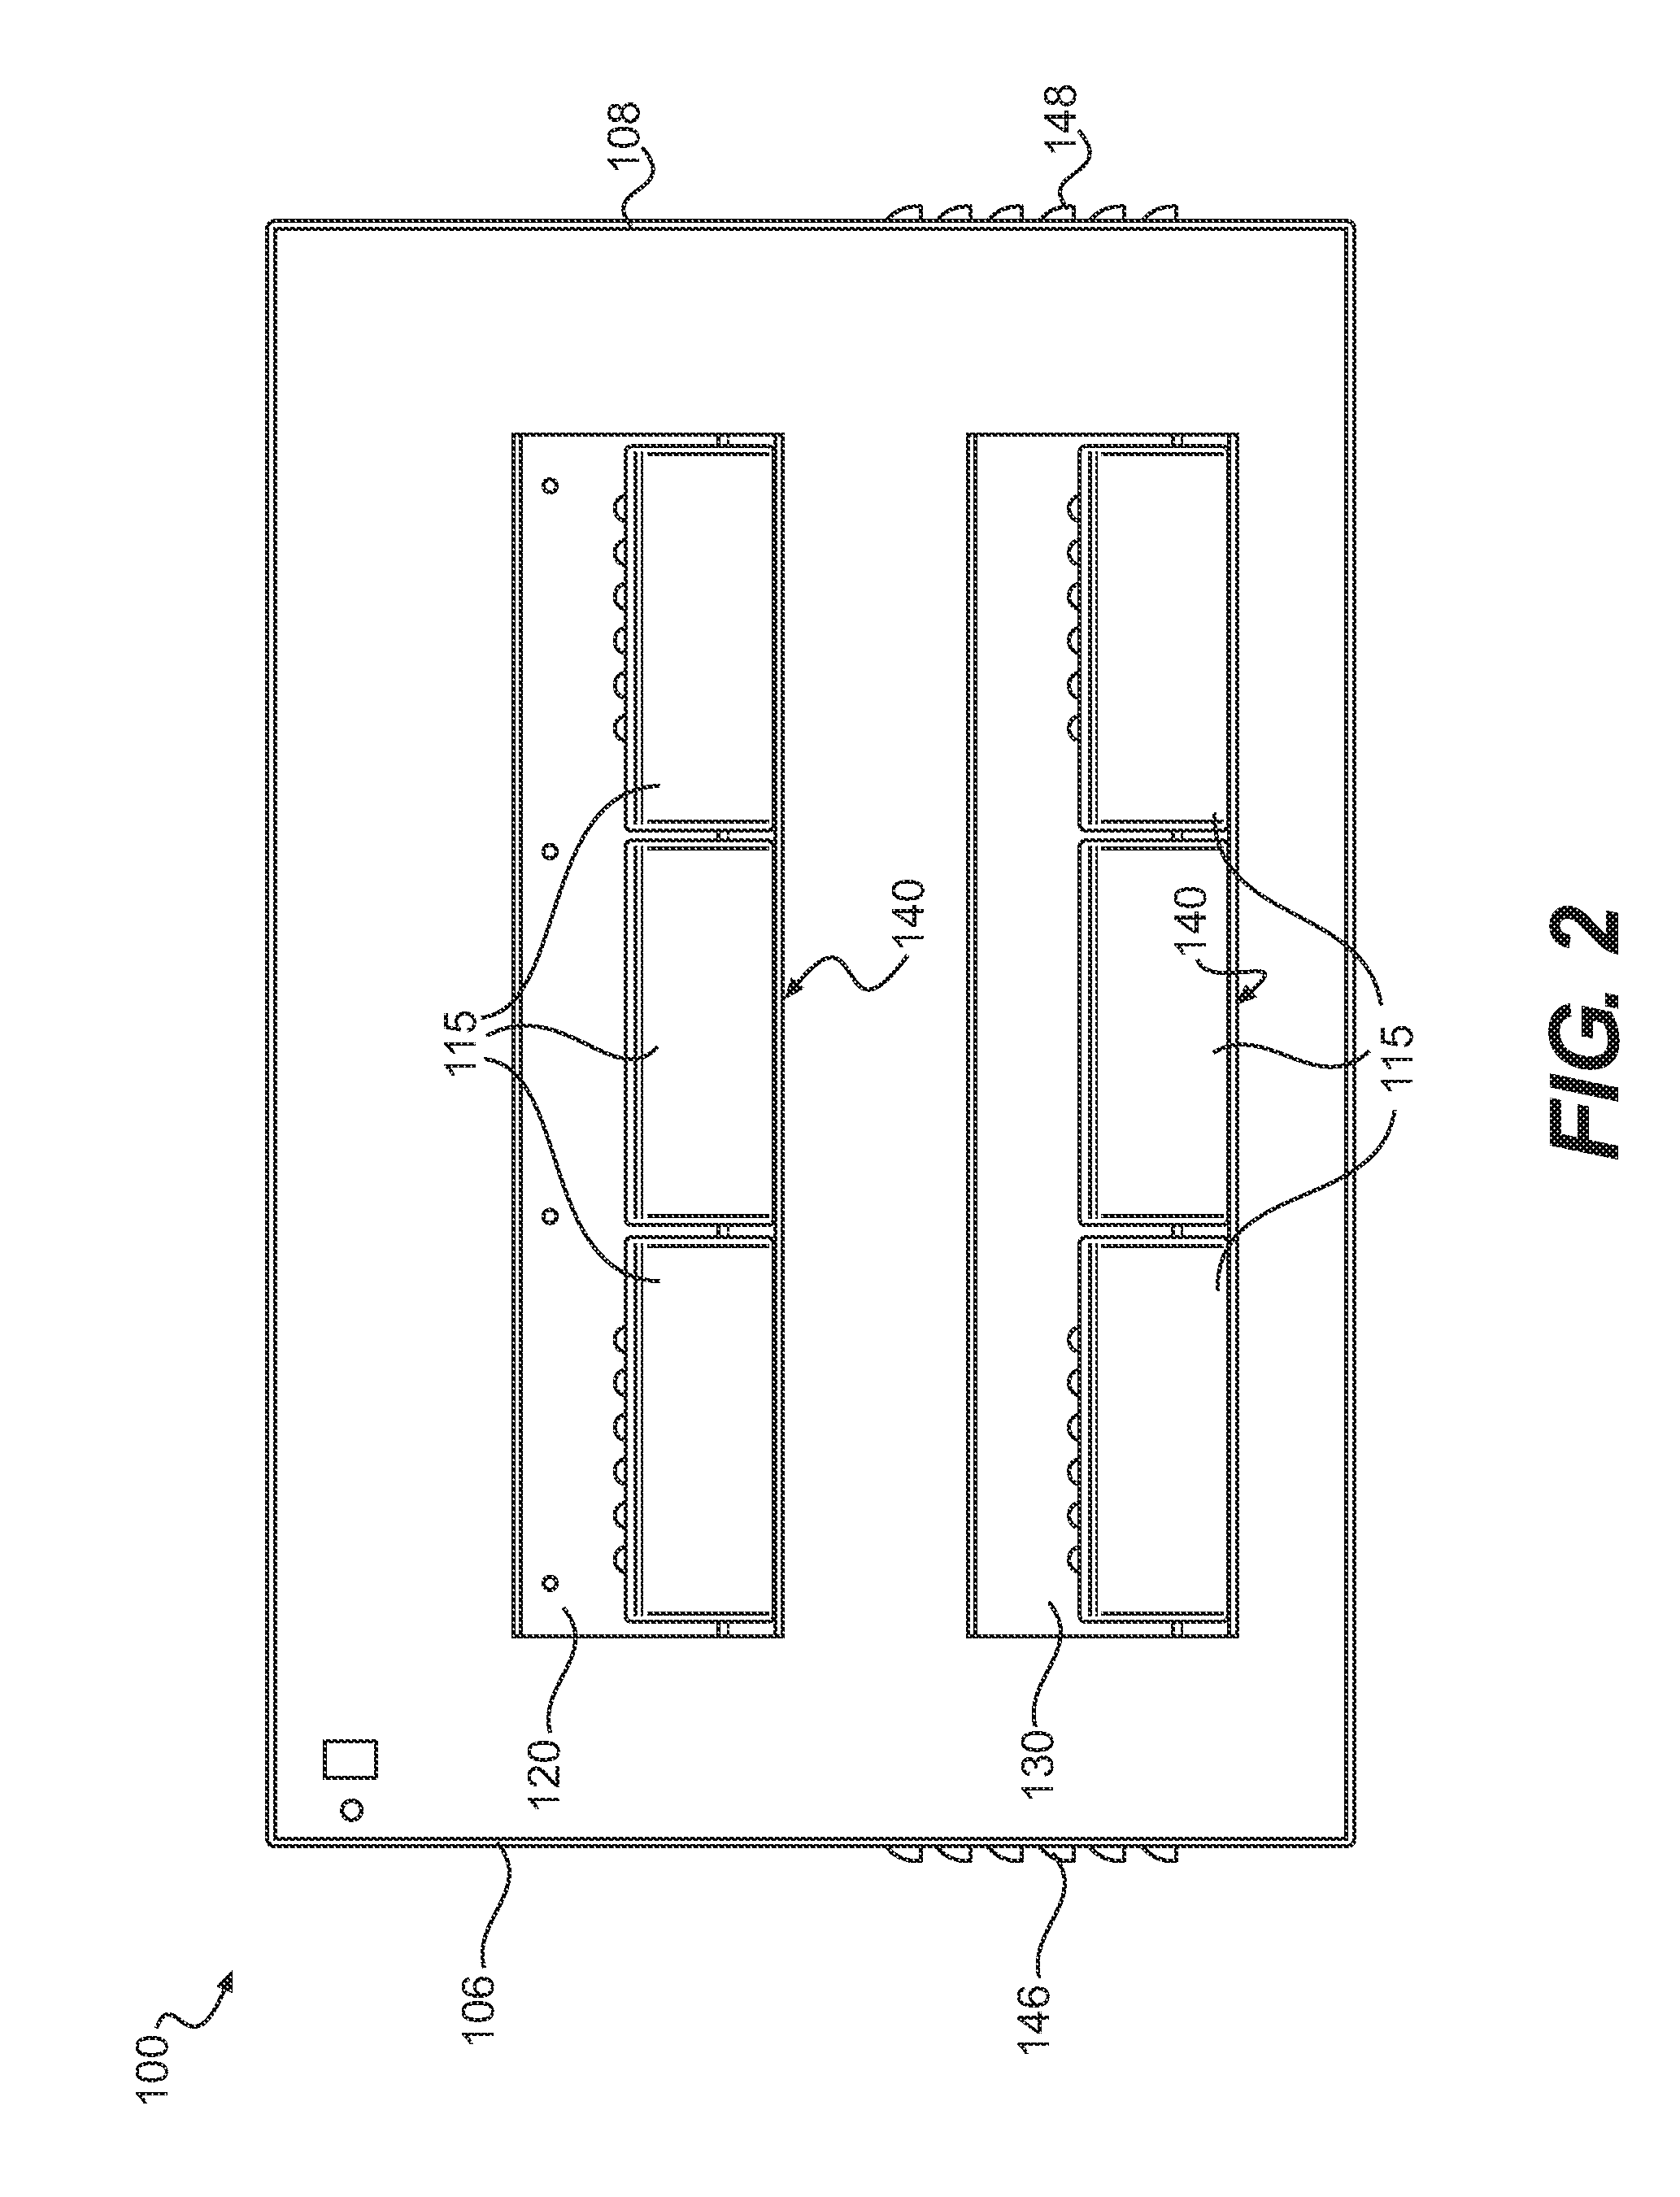 Holding cabinets, methods for controlling environmental conditions in holding cabinets, and computer-readable media storing instructions for implementing such methods